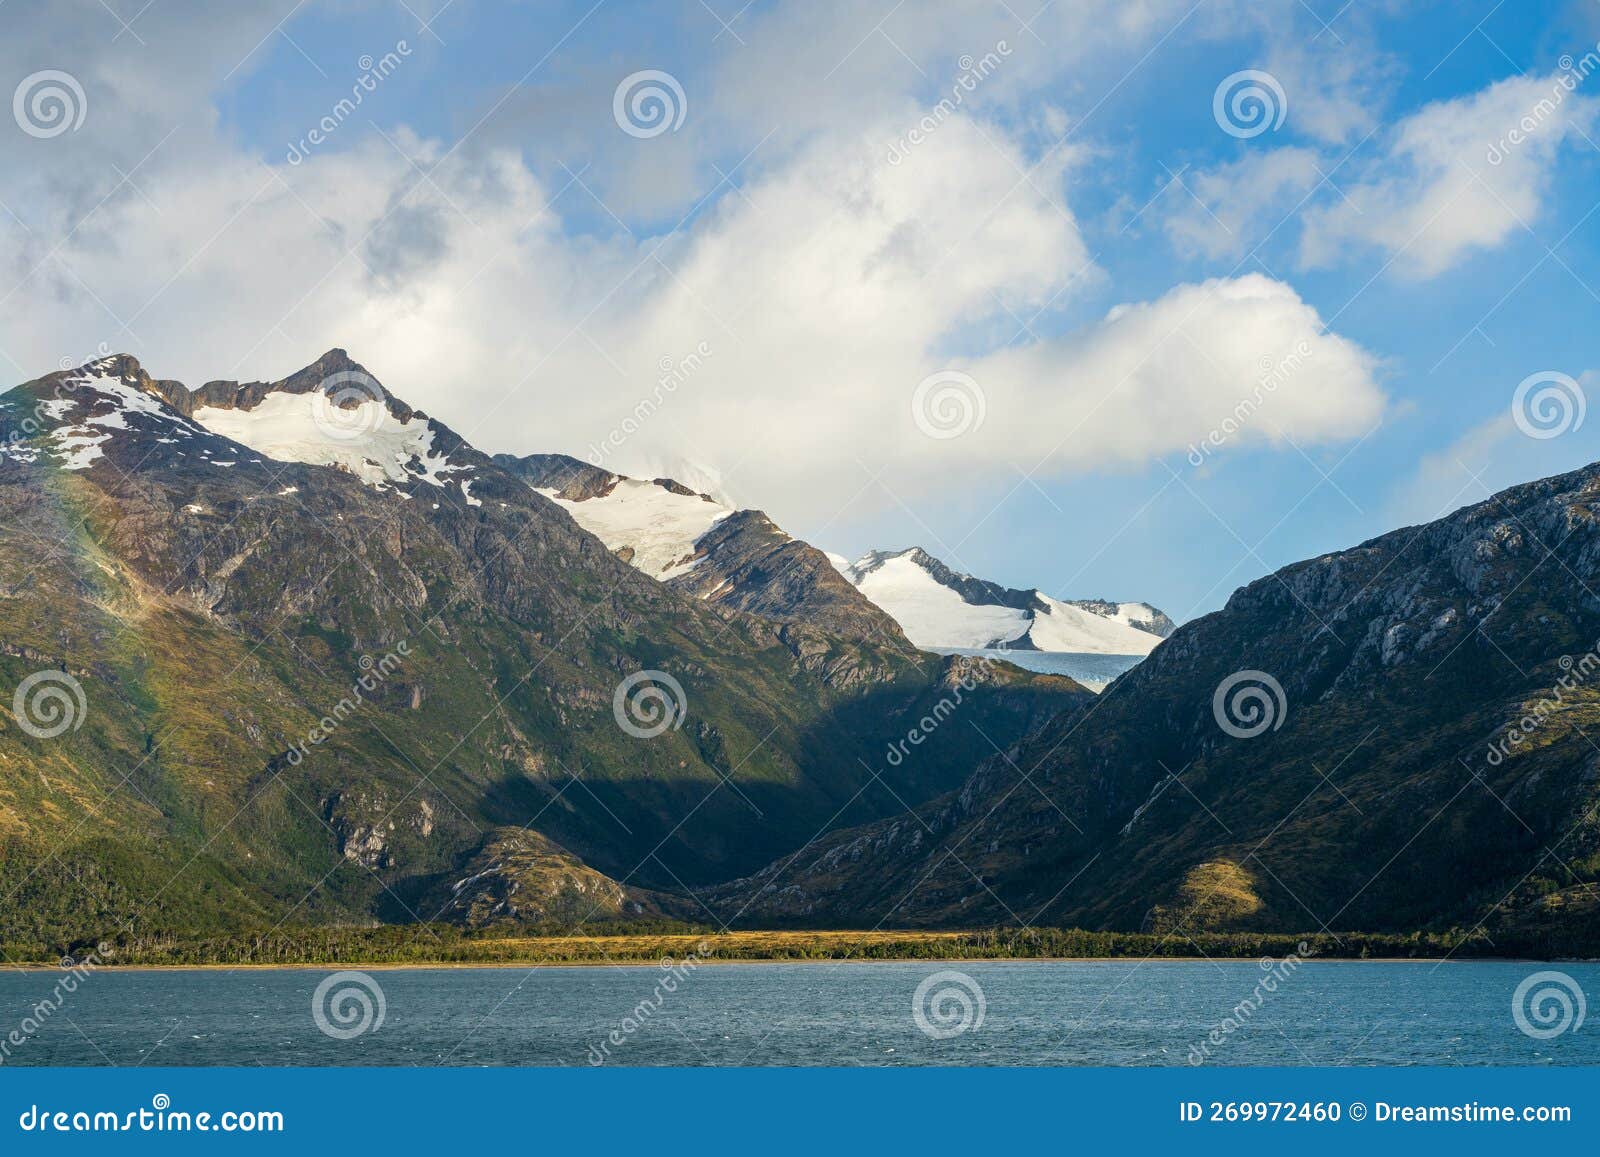 panorama of holanda glacier by beagle channel with rainbow